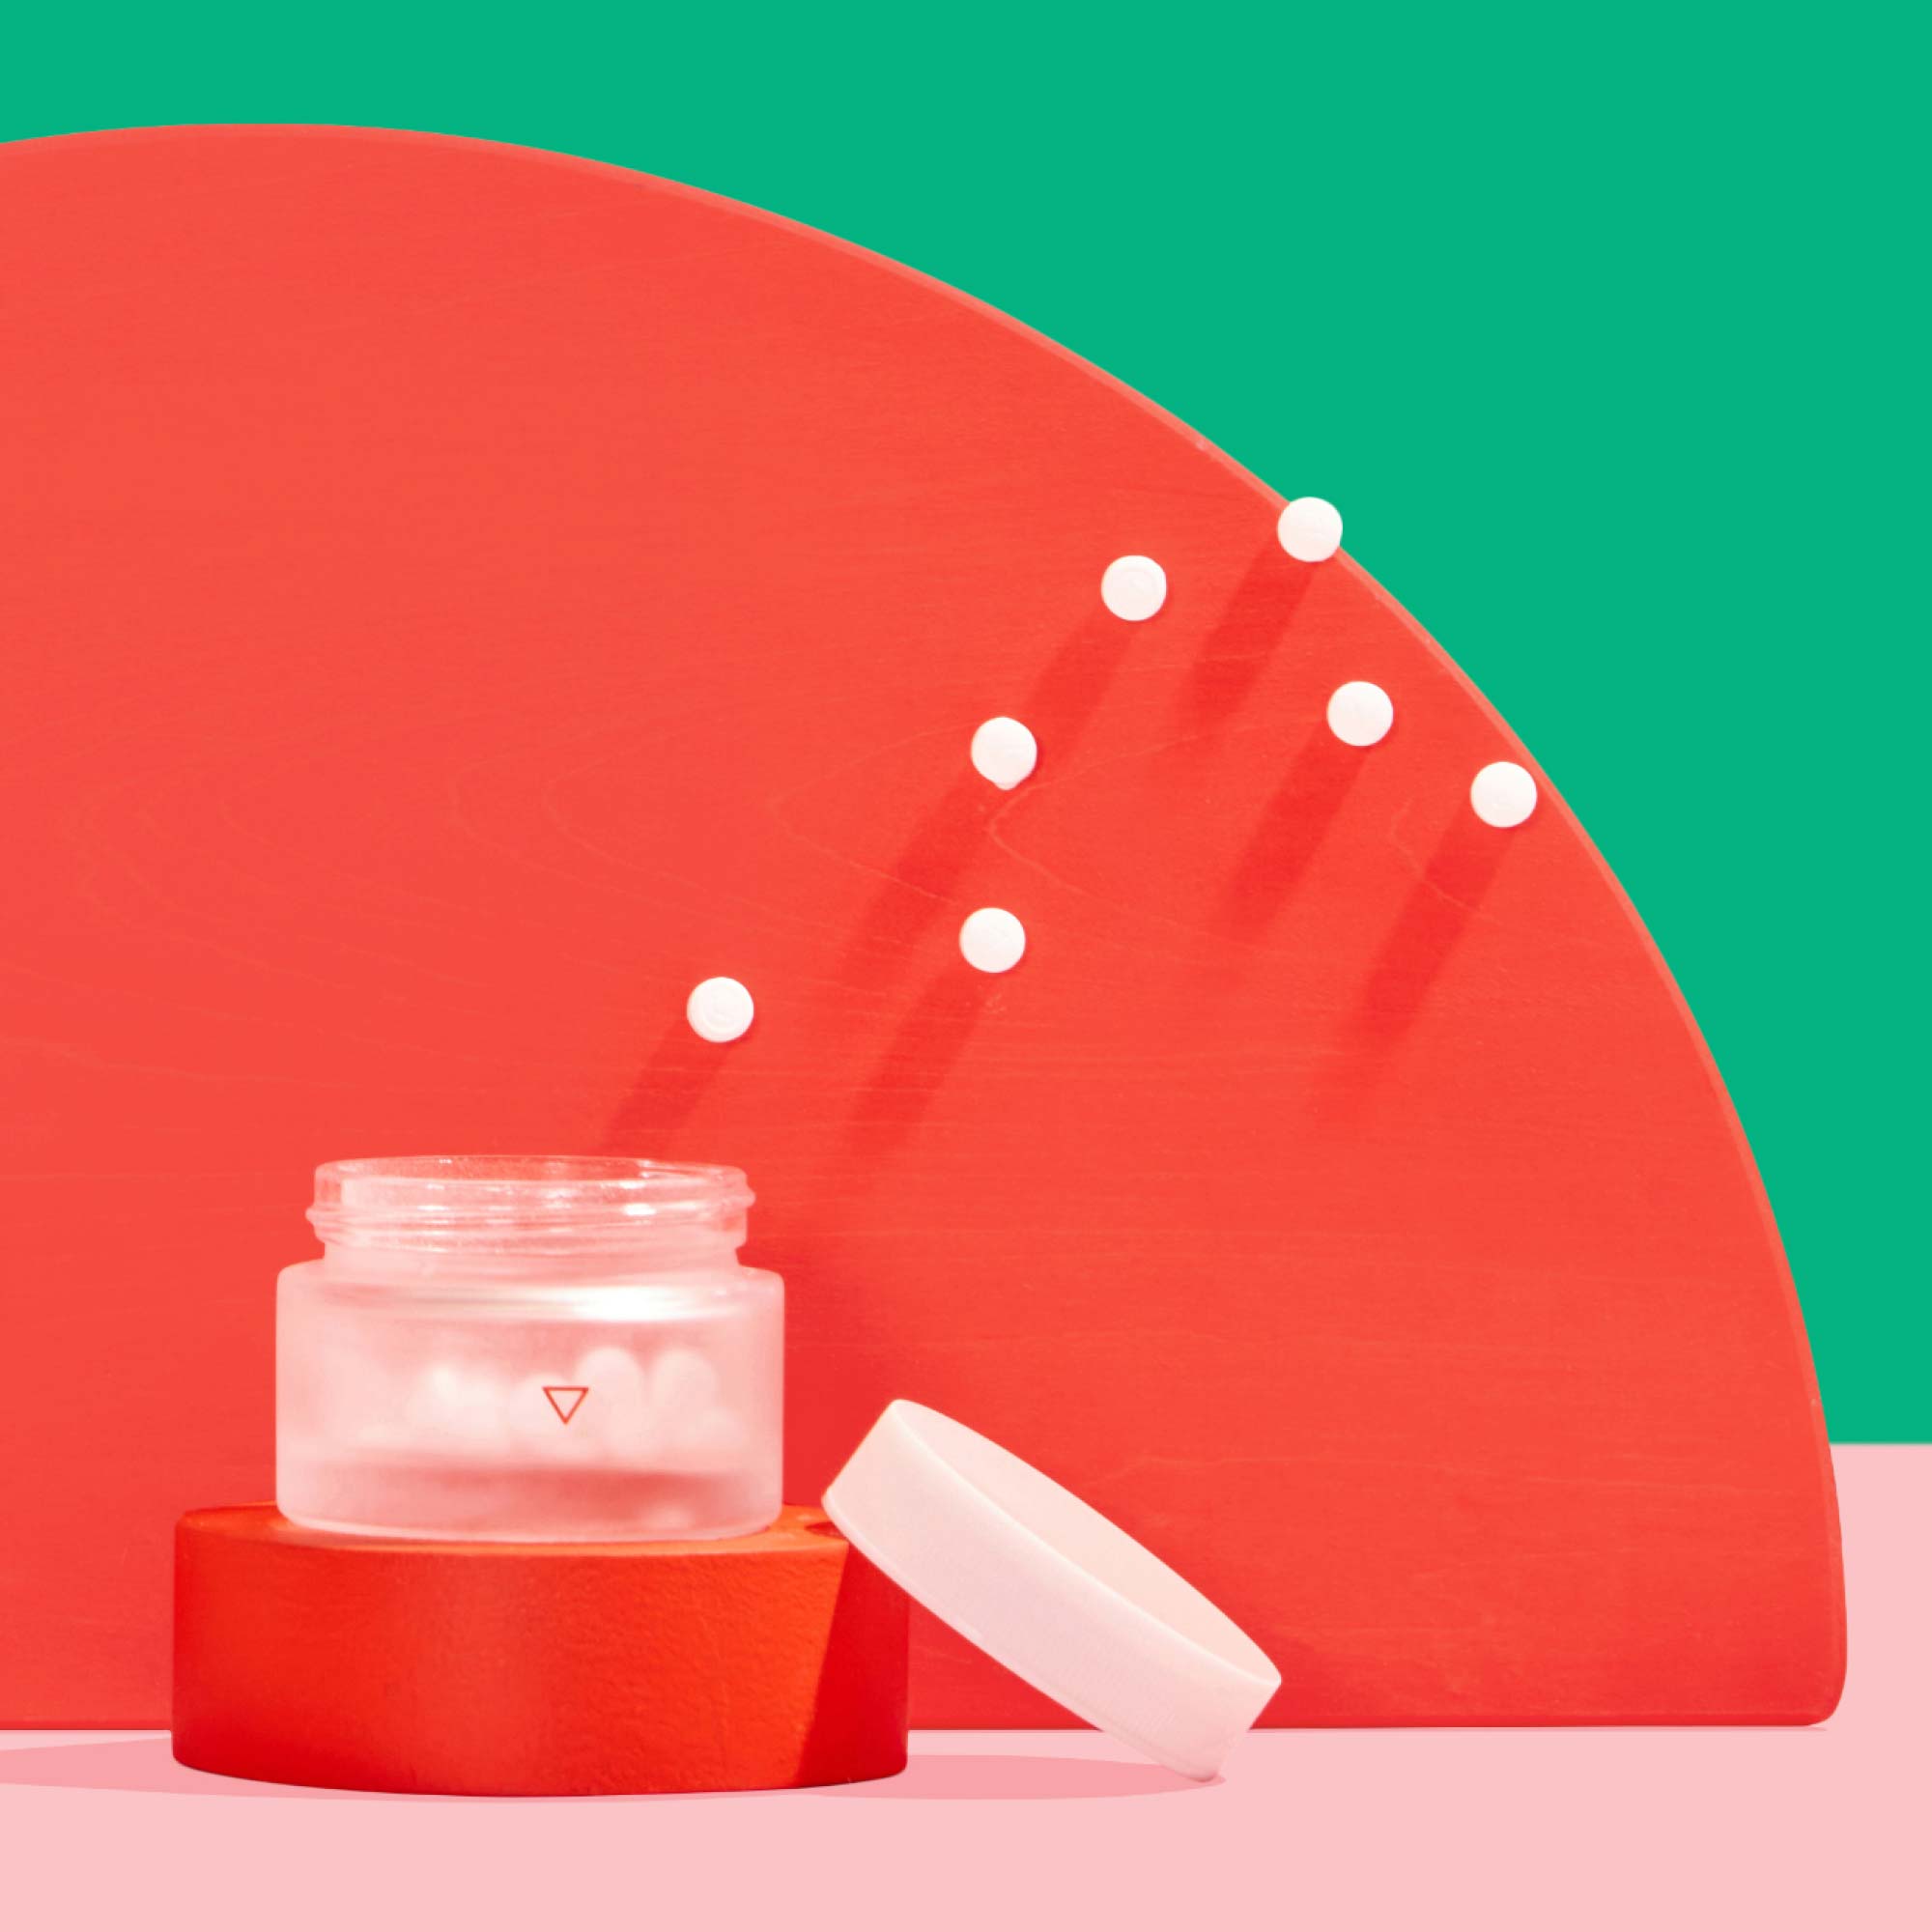 A Wisp small glass pill jar with pills floating out of it near colorful abstract shapes on a pink surface with a green background